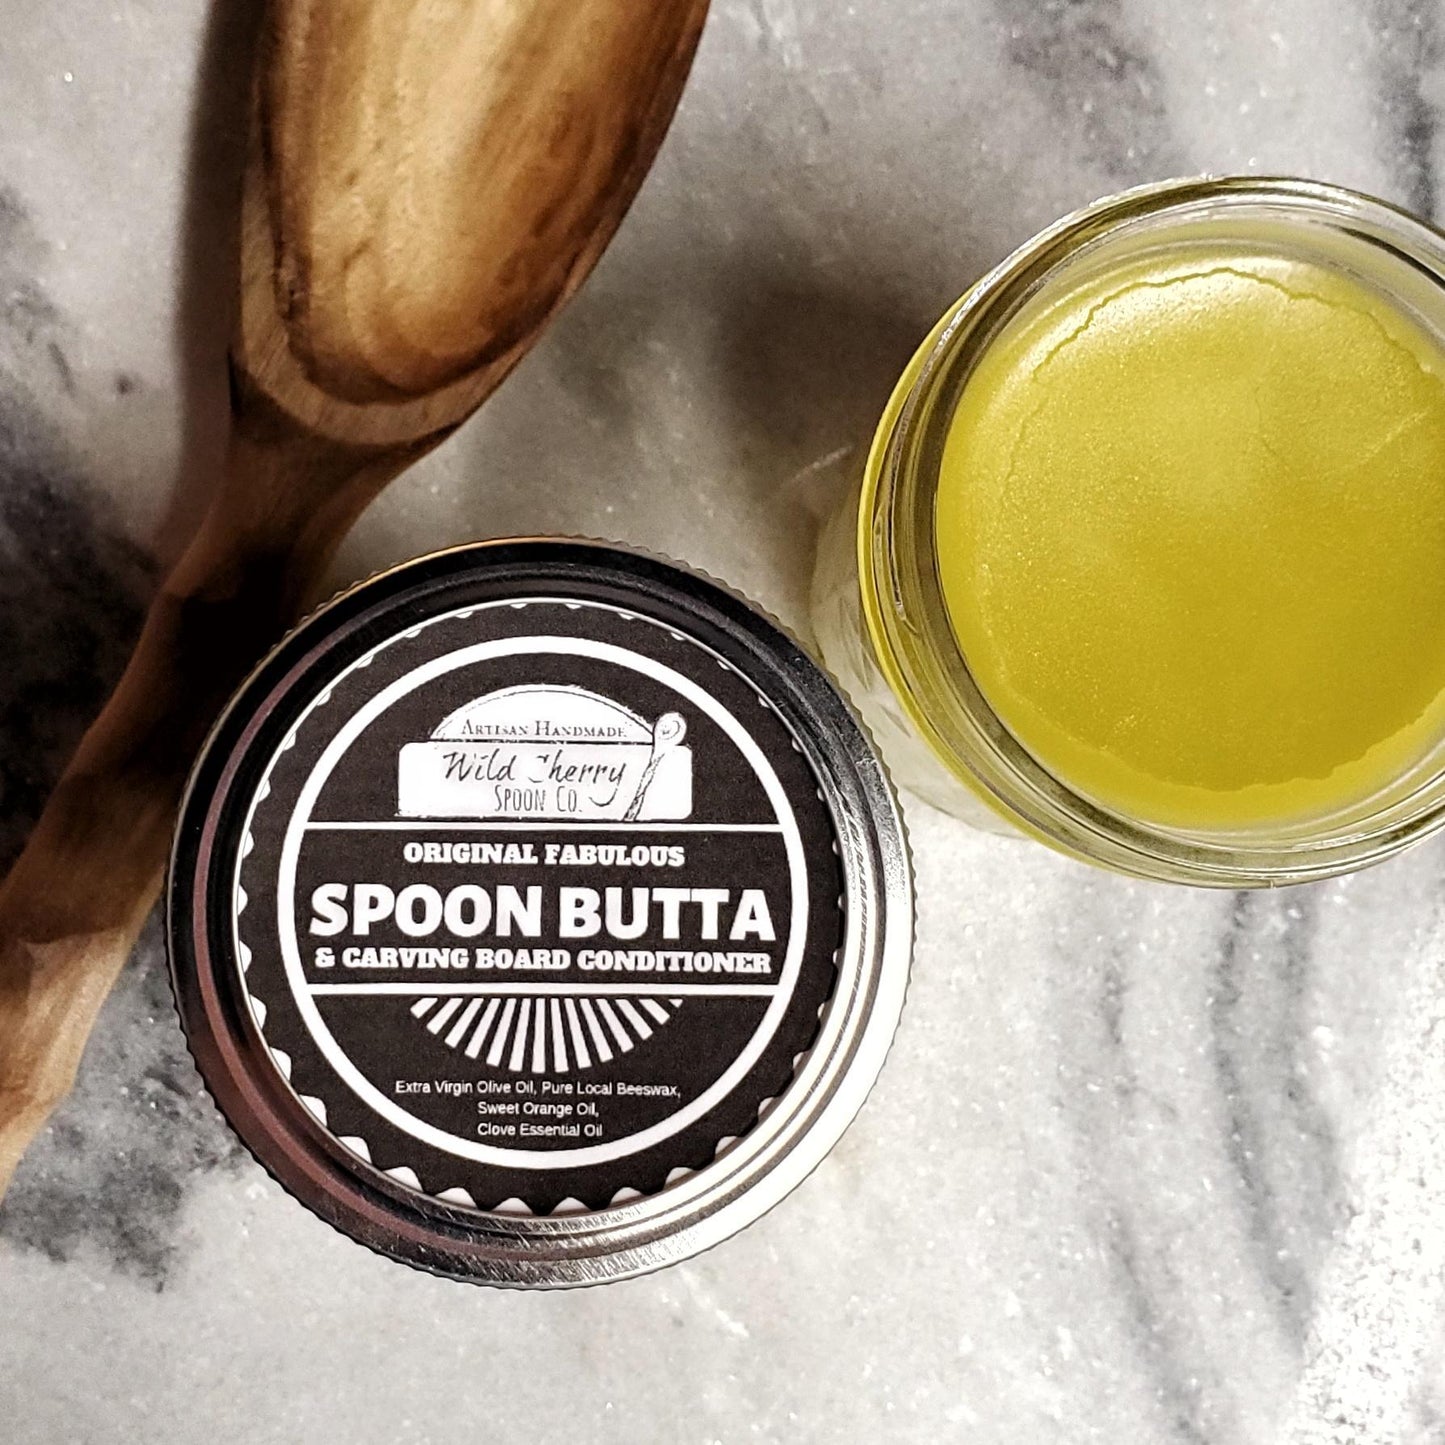 Spoon Butta, Wood Spoon and Cutting Board Conditioner Single Jar - premium product - olive oil, orange oil, clove oil, pure beeswax (Sale Price: 2 oz. - $33.14 & 4 oz. - $74.80 CAD)